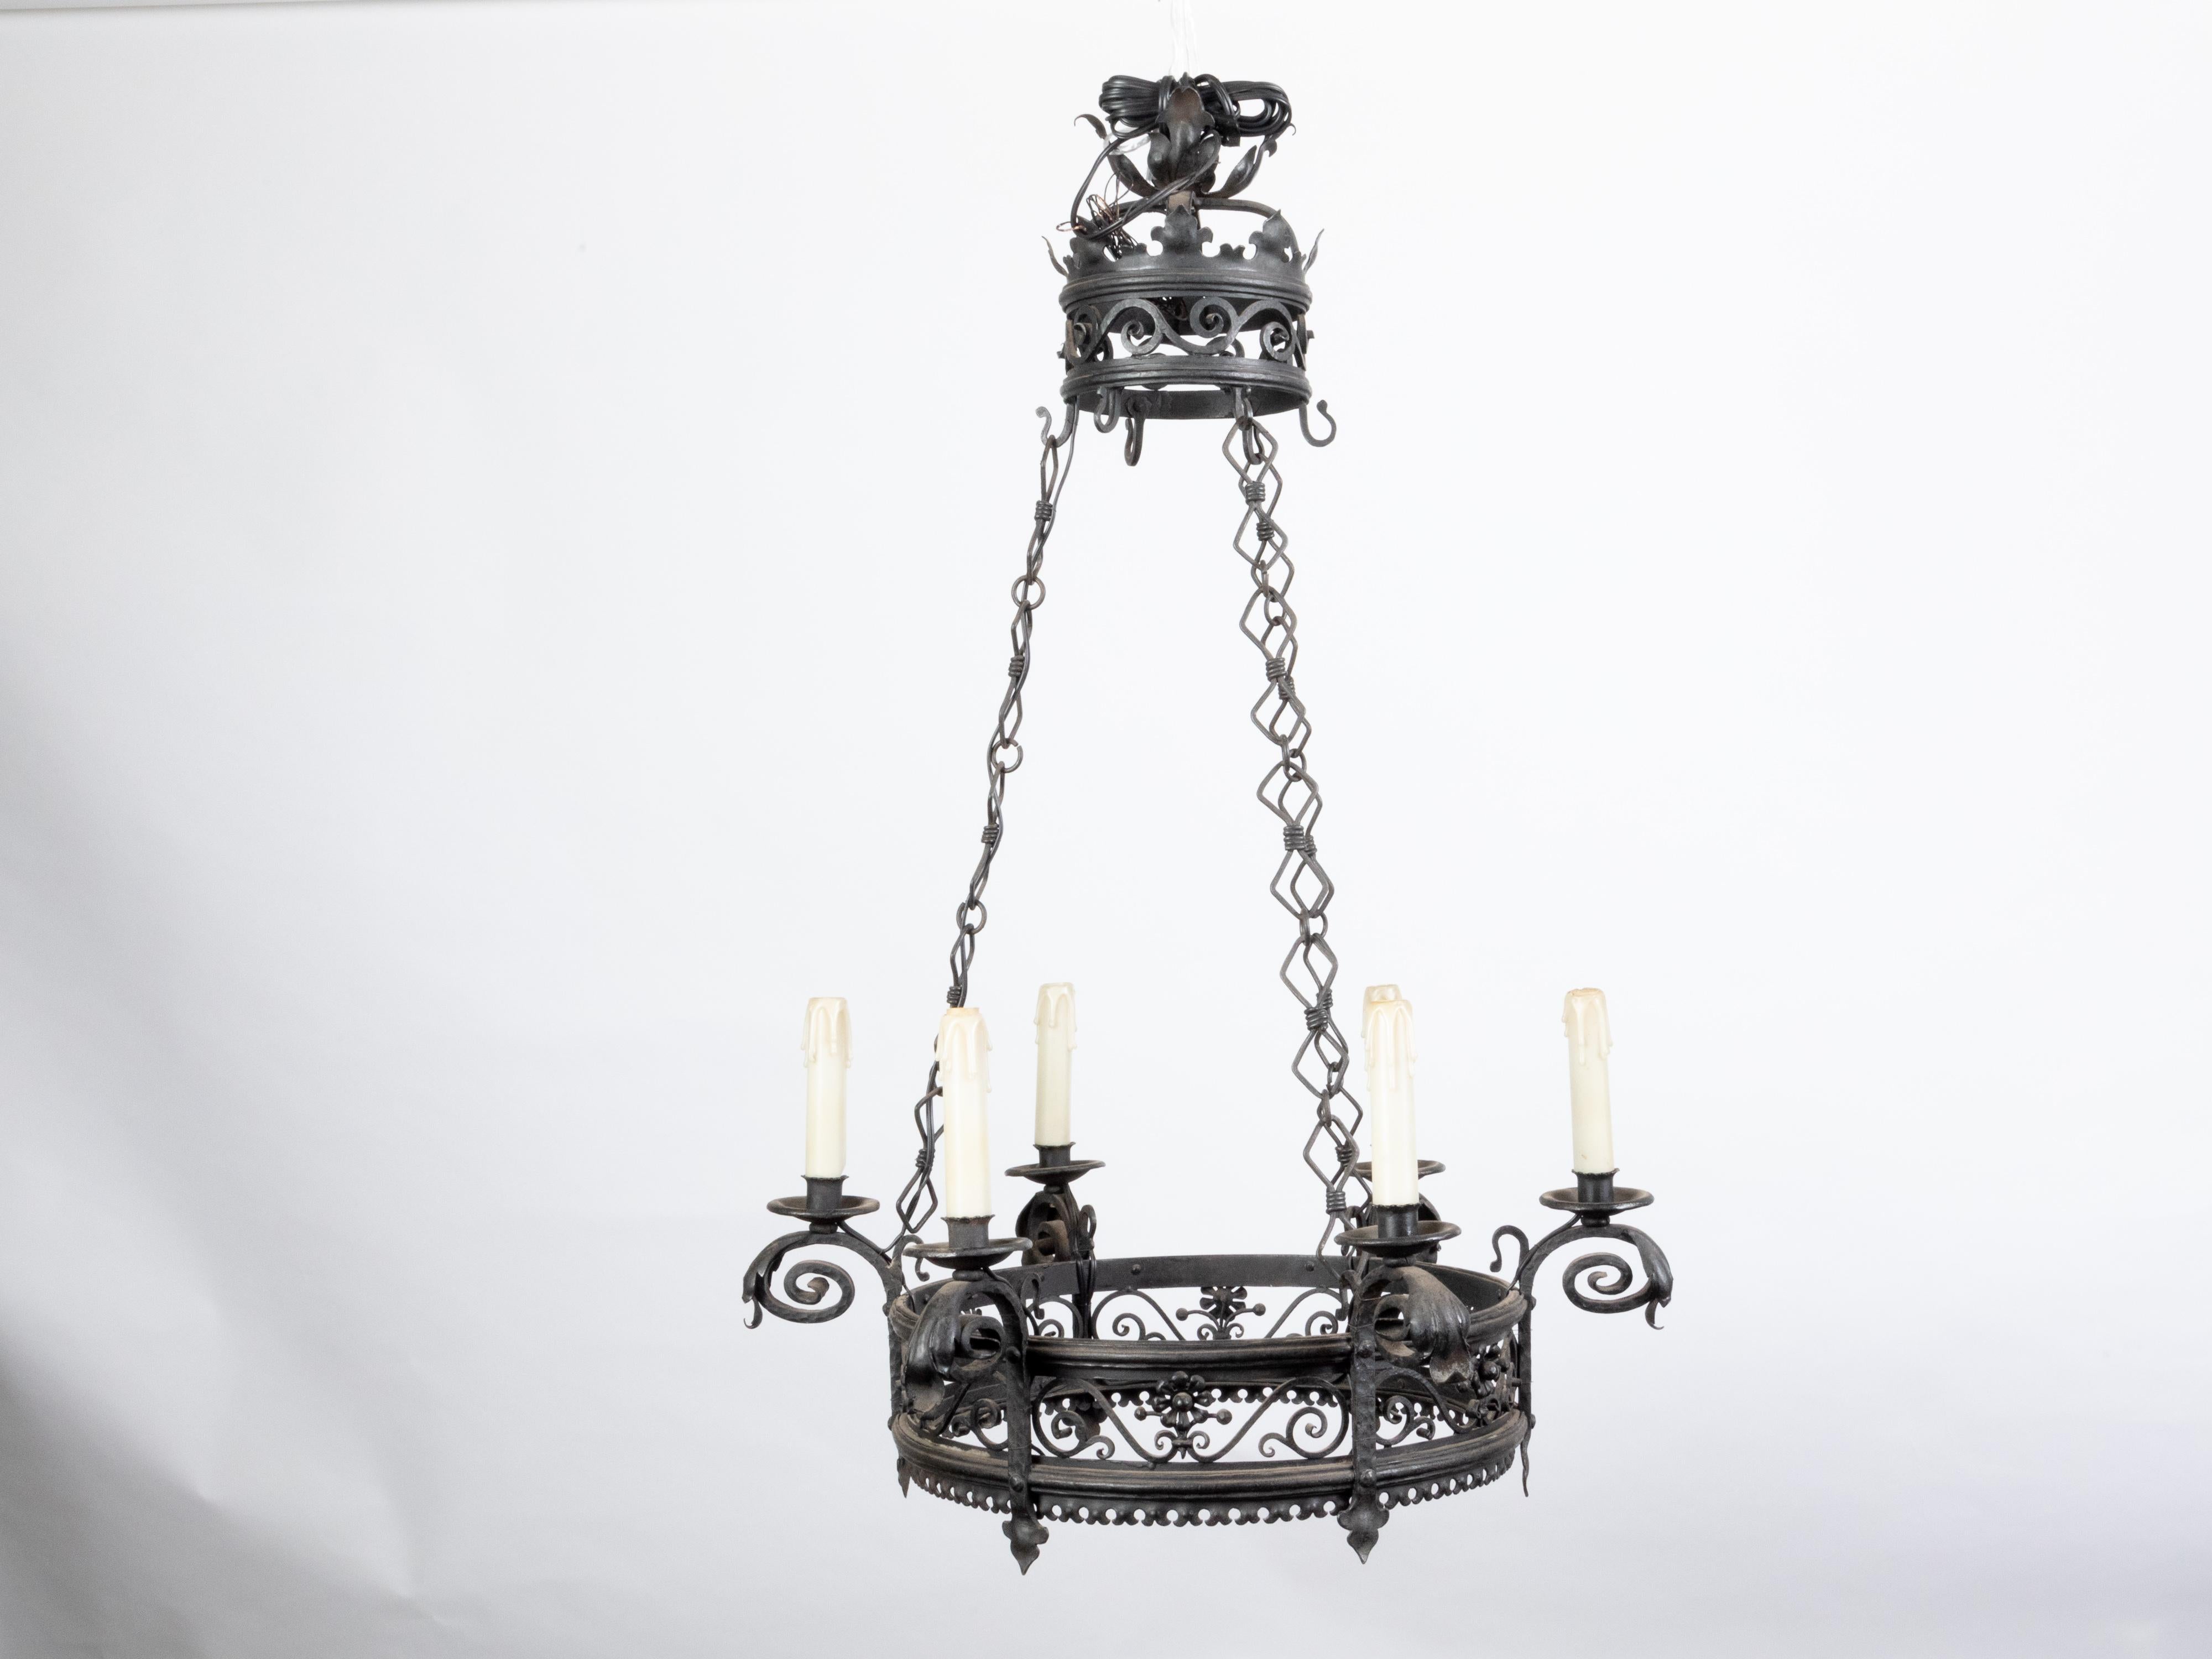 20th Century French 1900s Turn of the Century Iron Chandelier with Six Lights and Scrollwork For Sale